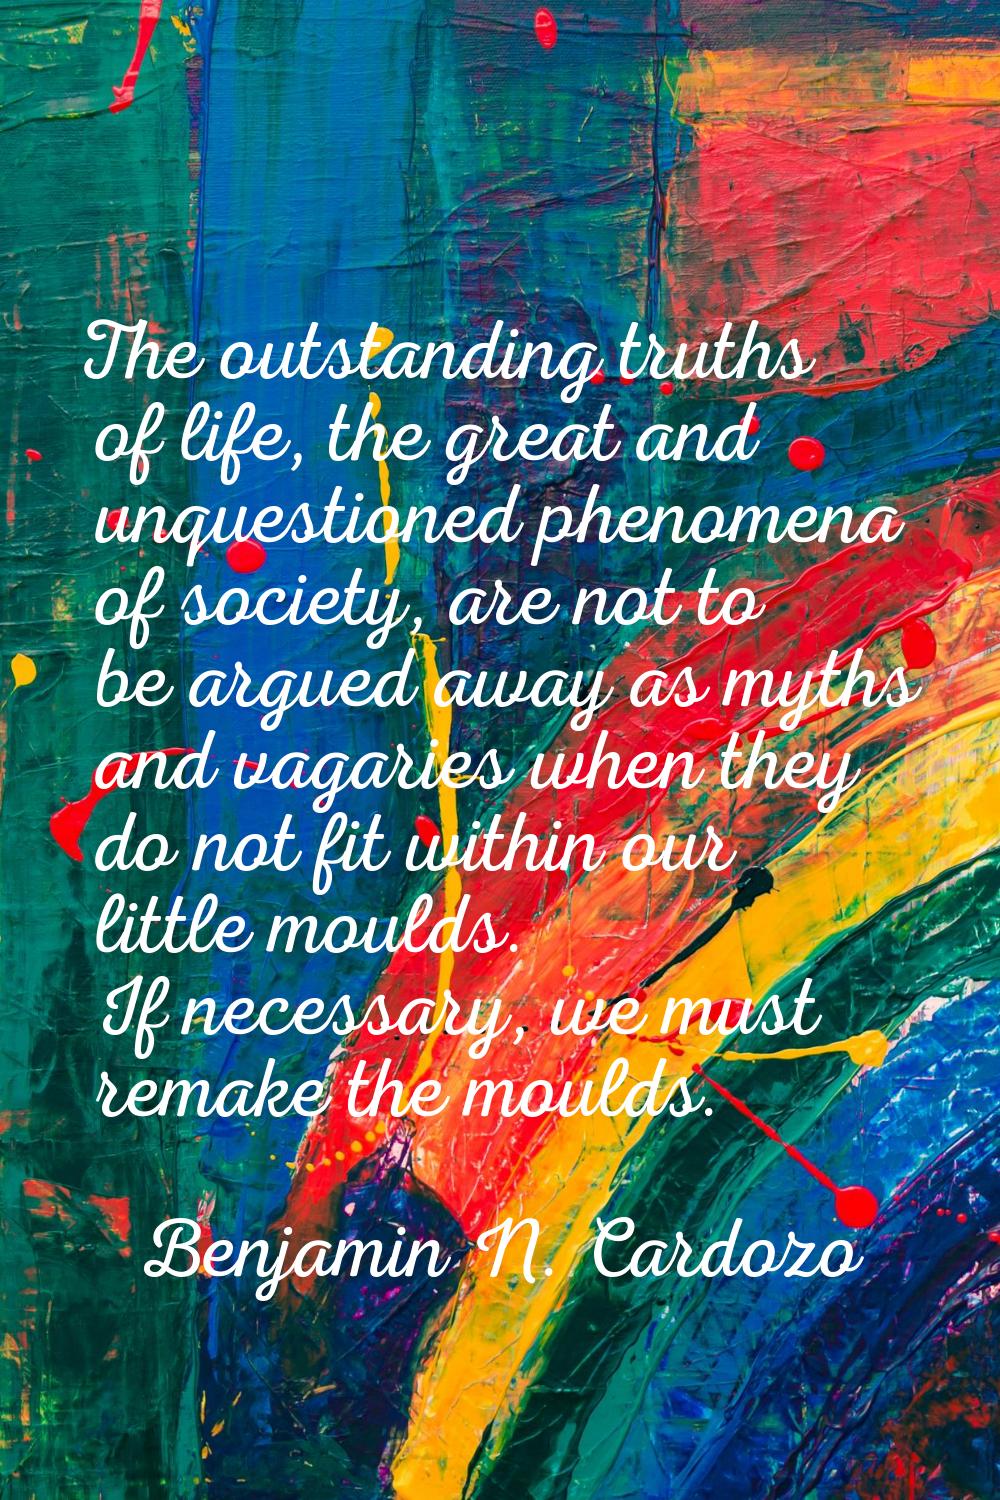 The outstanding truths of life, the great and unquestioned phenomena of society, are not to be argu